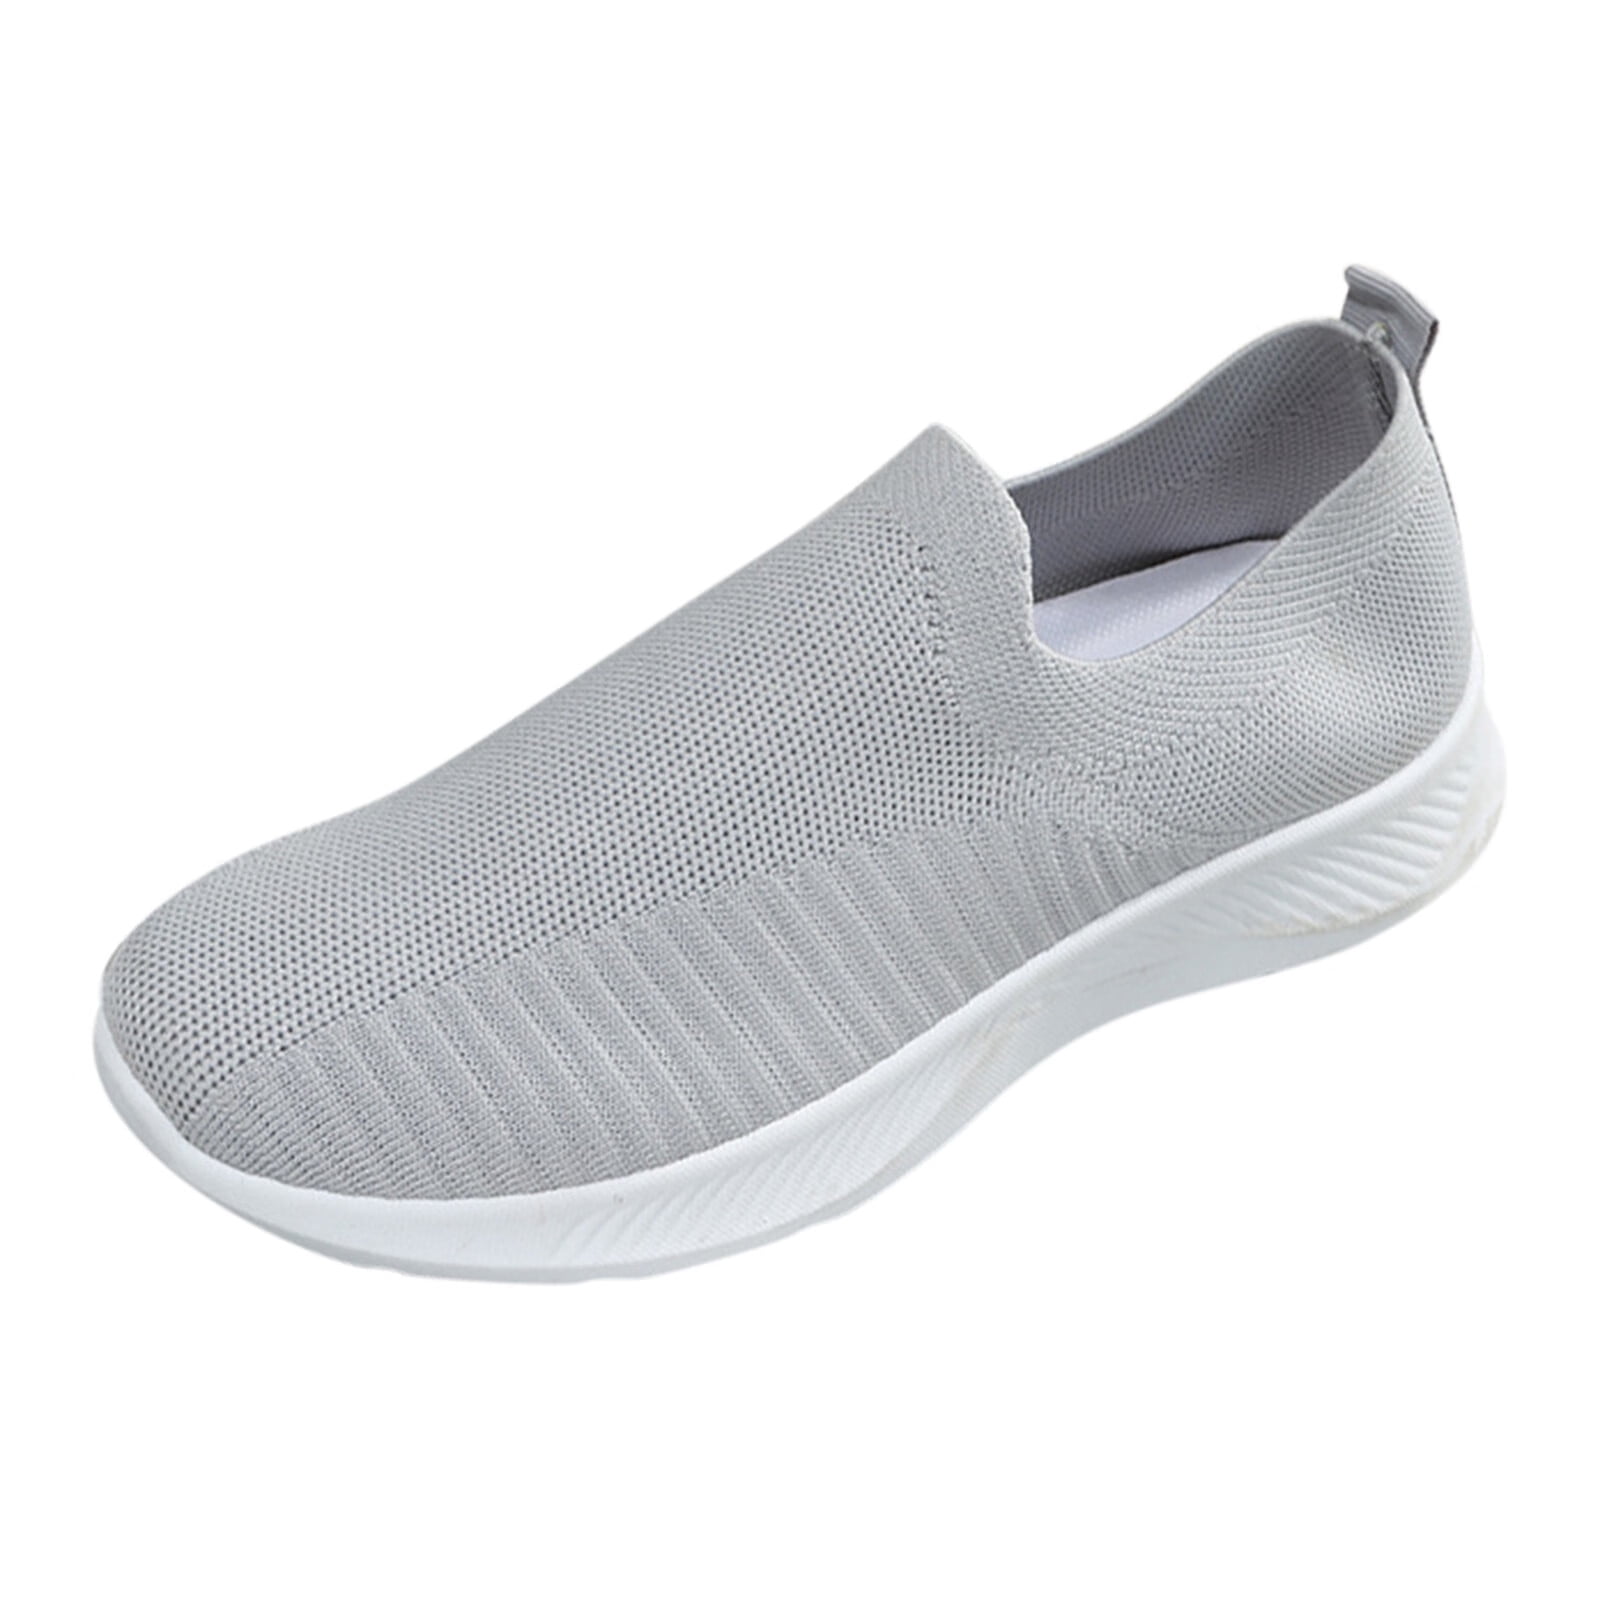 Síguenos oveja Relación sneakers for Women Women Flat Sole Wear Casual Shoes Fashion Soft Sole  Breathable Casual Shoes Net surface Dress Sandals for Women Grey -  Walmart.com